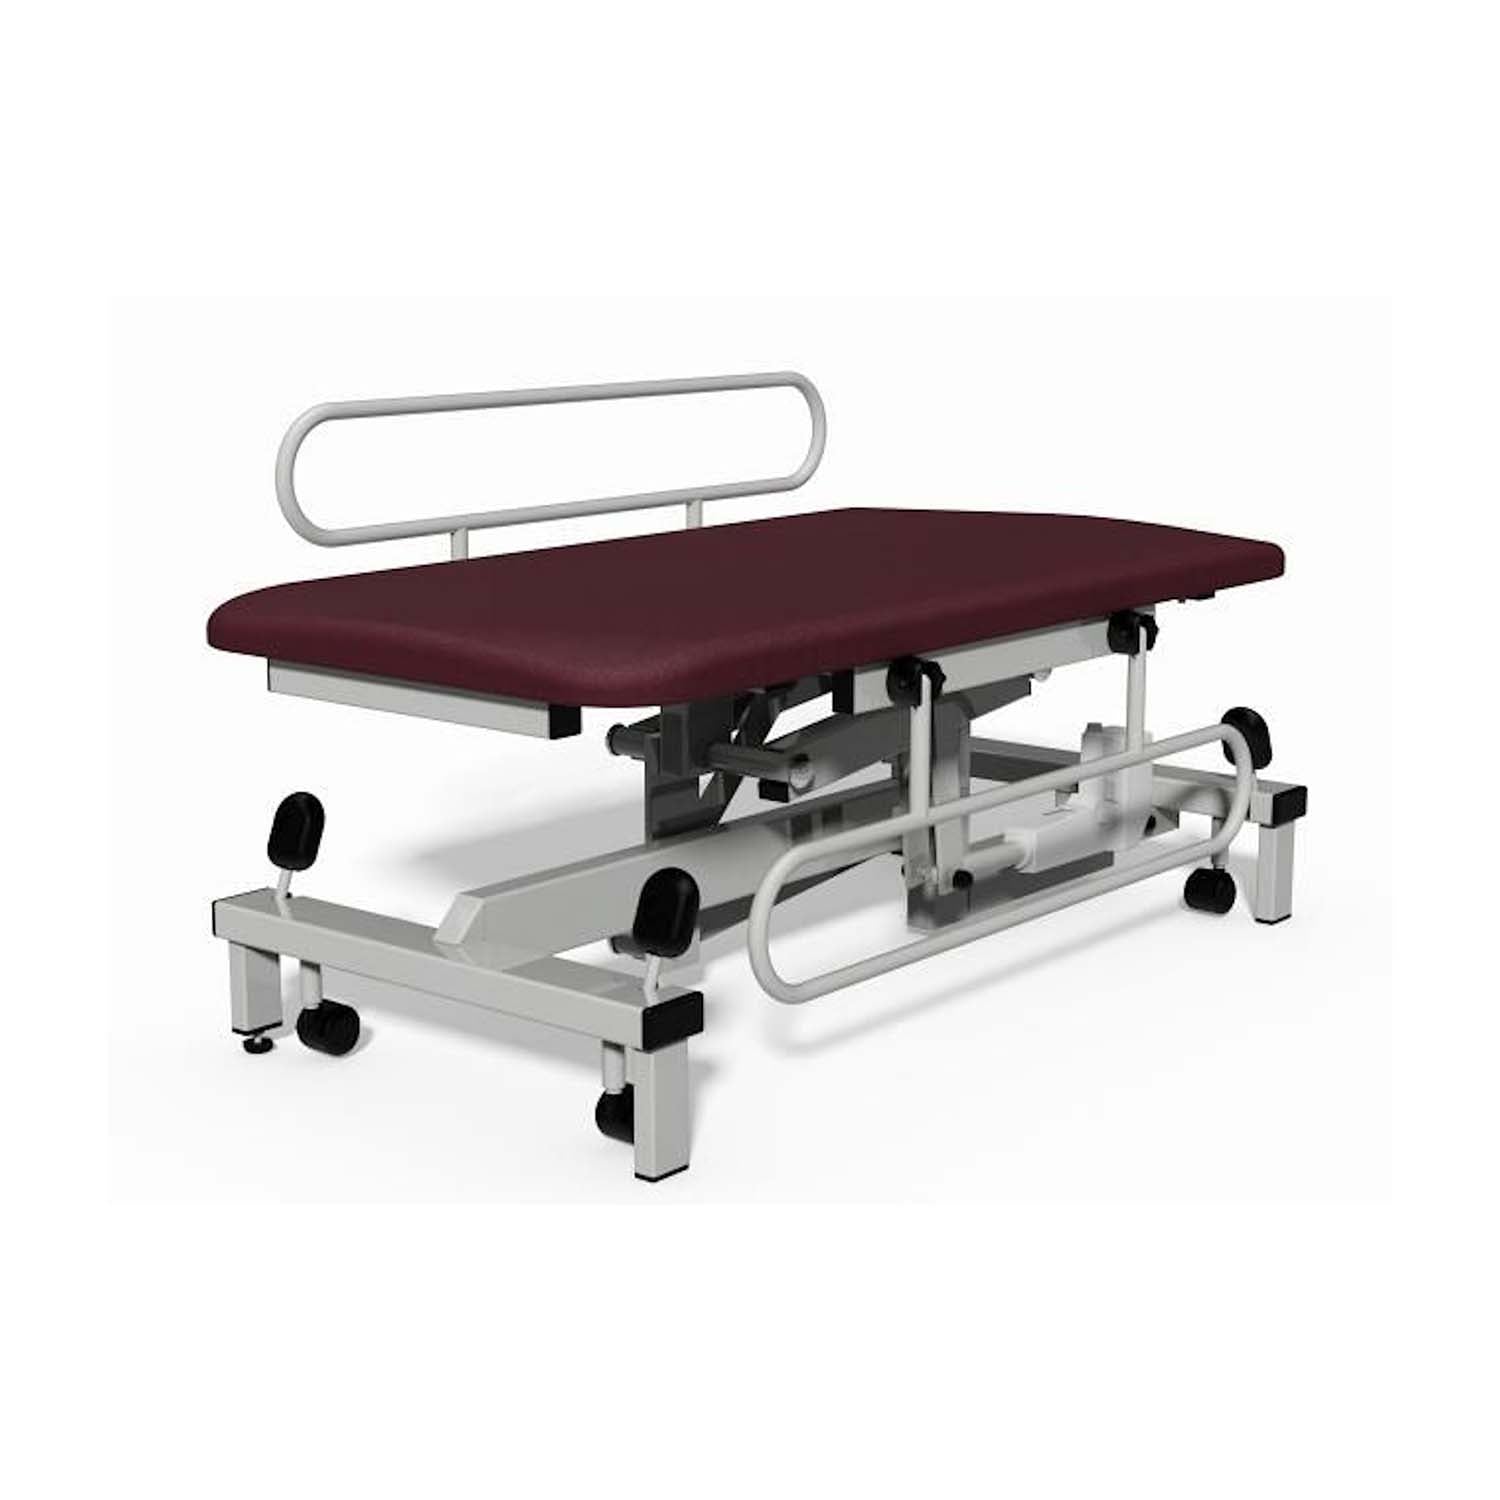 Plinth 2000 Model 502 Changing Table | Hydraulic | Mulled Wine